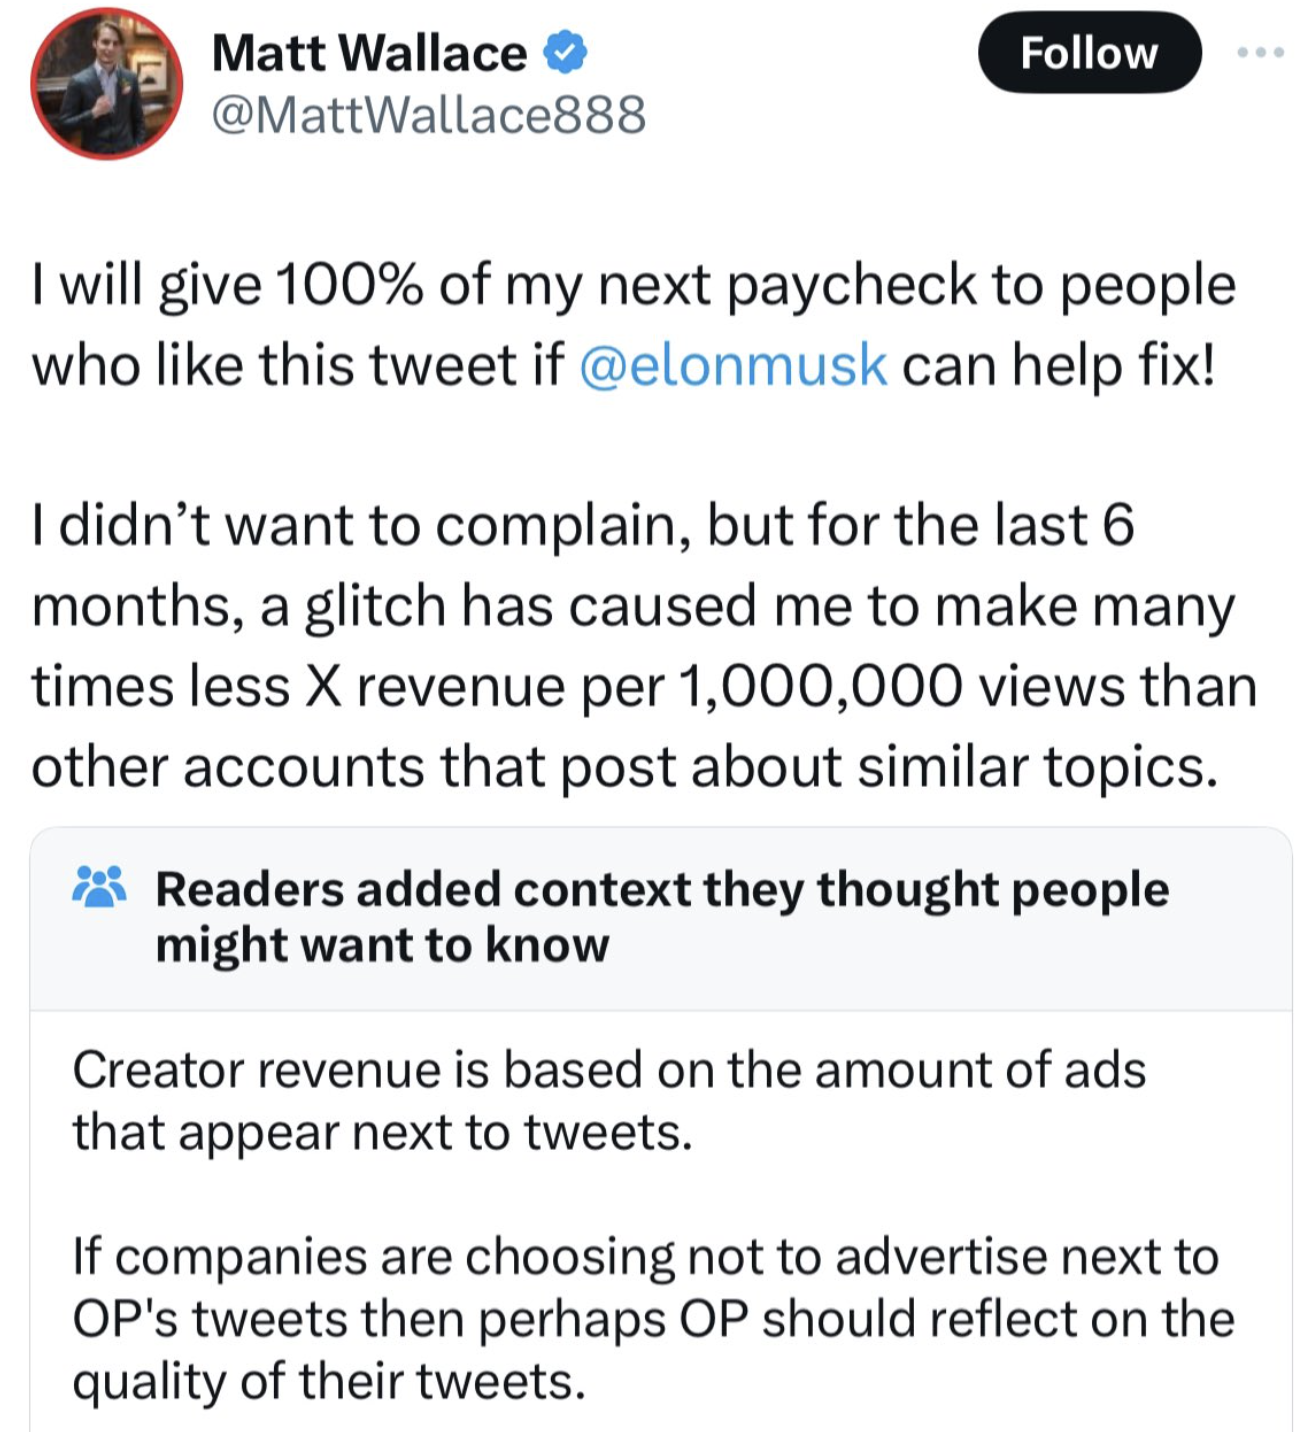 screenshot - Matt Wallace I will give 100% of my next paycheck to people who this tweet if can help fix! I didn't want to complain, but for the last 6 months, a glitch has caused me to make many times less X revenue per 1,000,000 views than other accounts